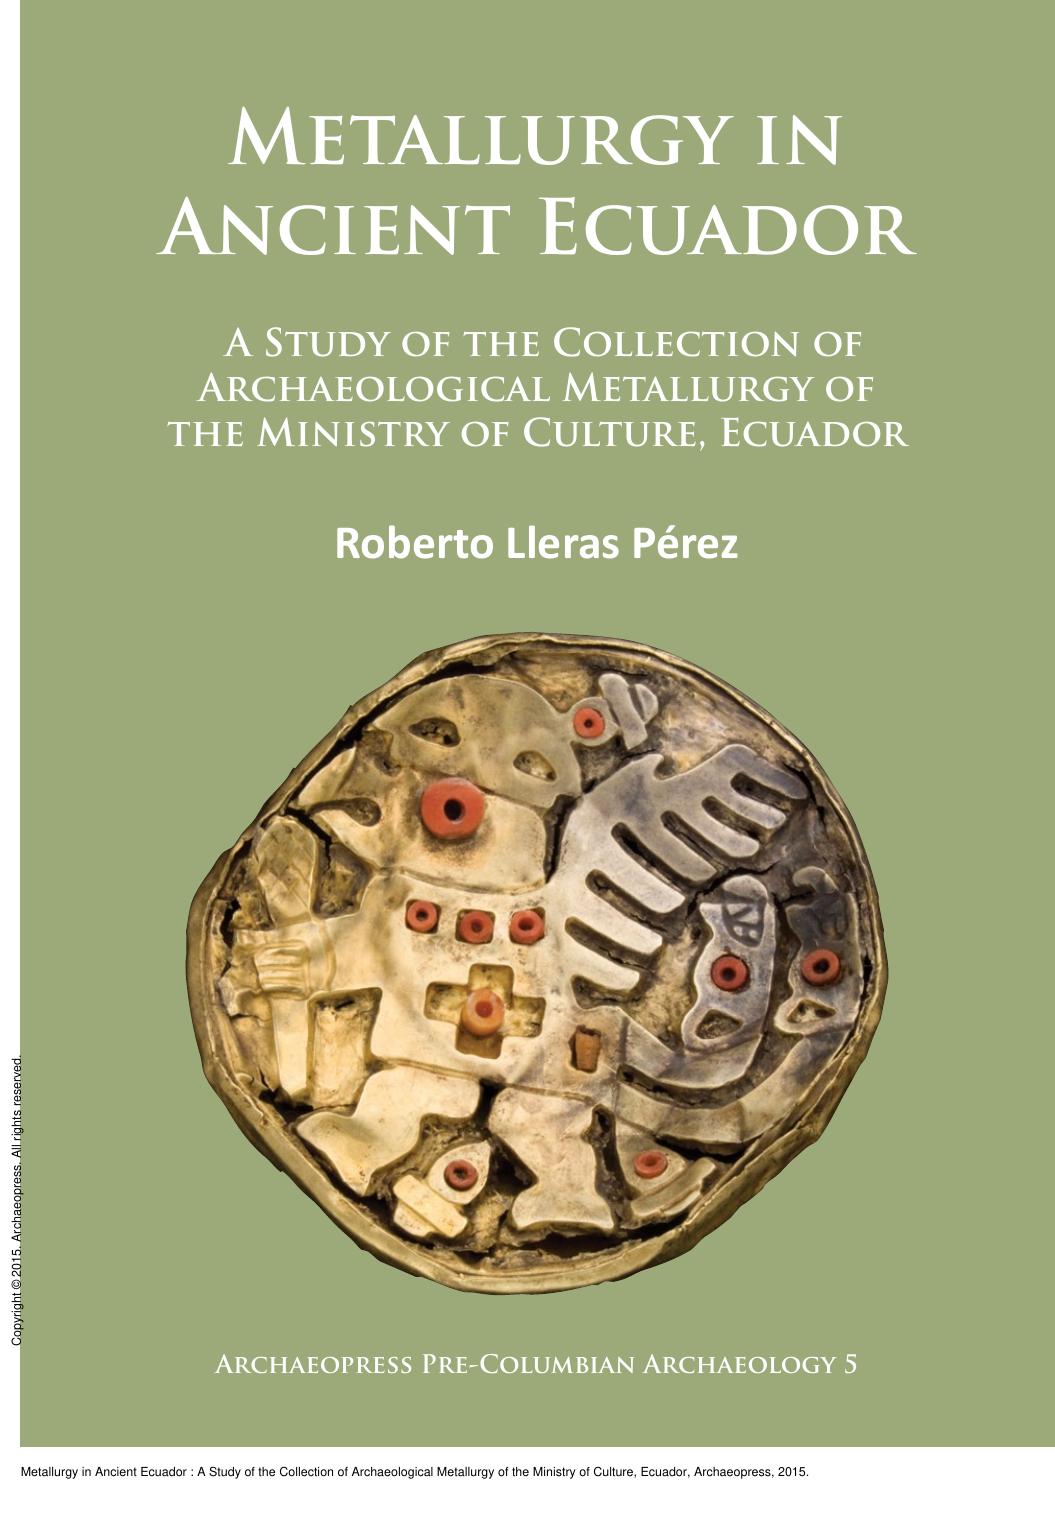 Metallurgy in Ancient Ecuador: A Study of the Collection of Archaeological Metallurgy of the Ministry of Culture, Ecuador by Roberto Lleras Perez